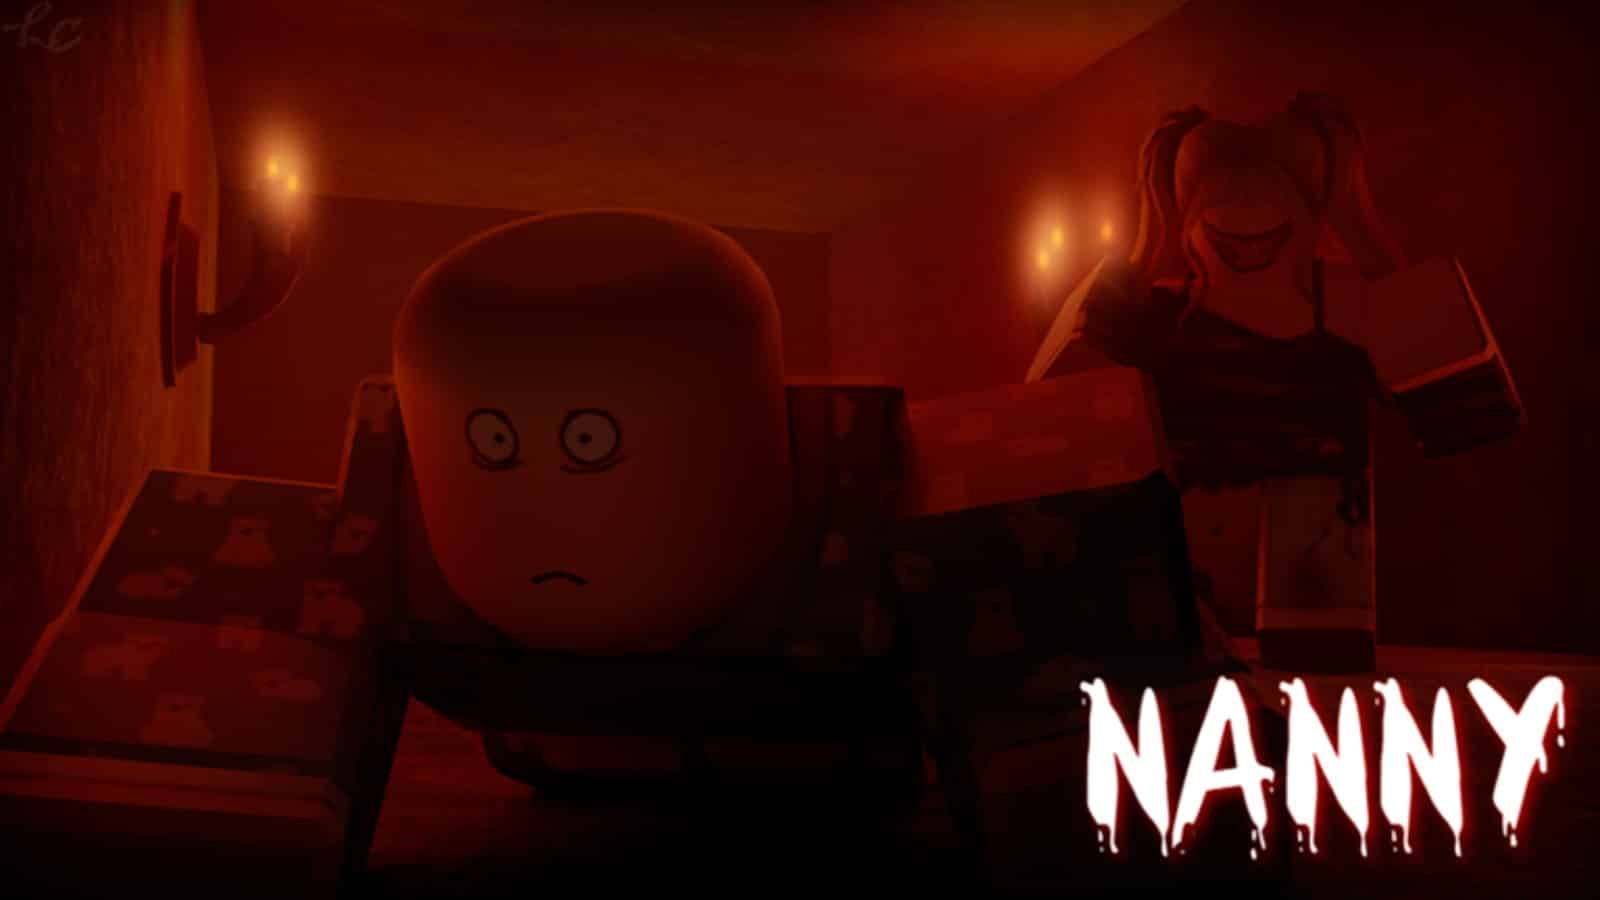 ⚠️ NEVER PLAY THESE HORROR GAMES ALONE #fyp #robloxhorror #roblox, scary  games to play